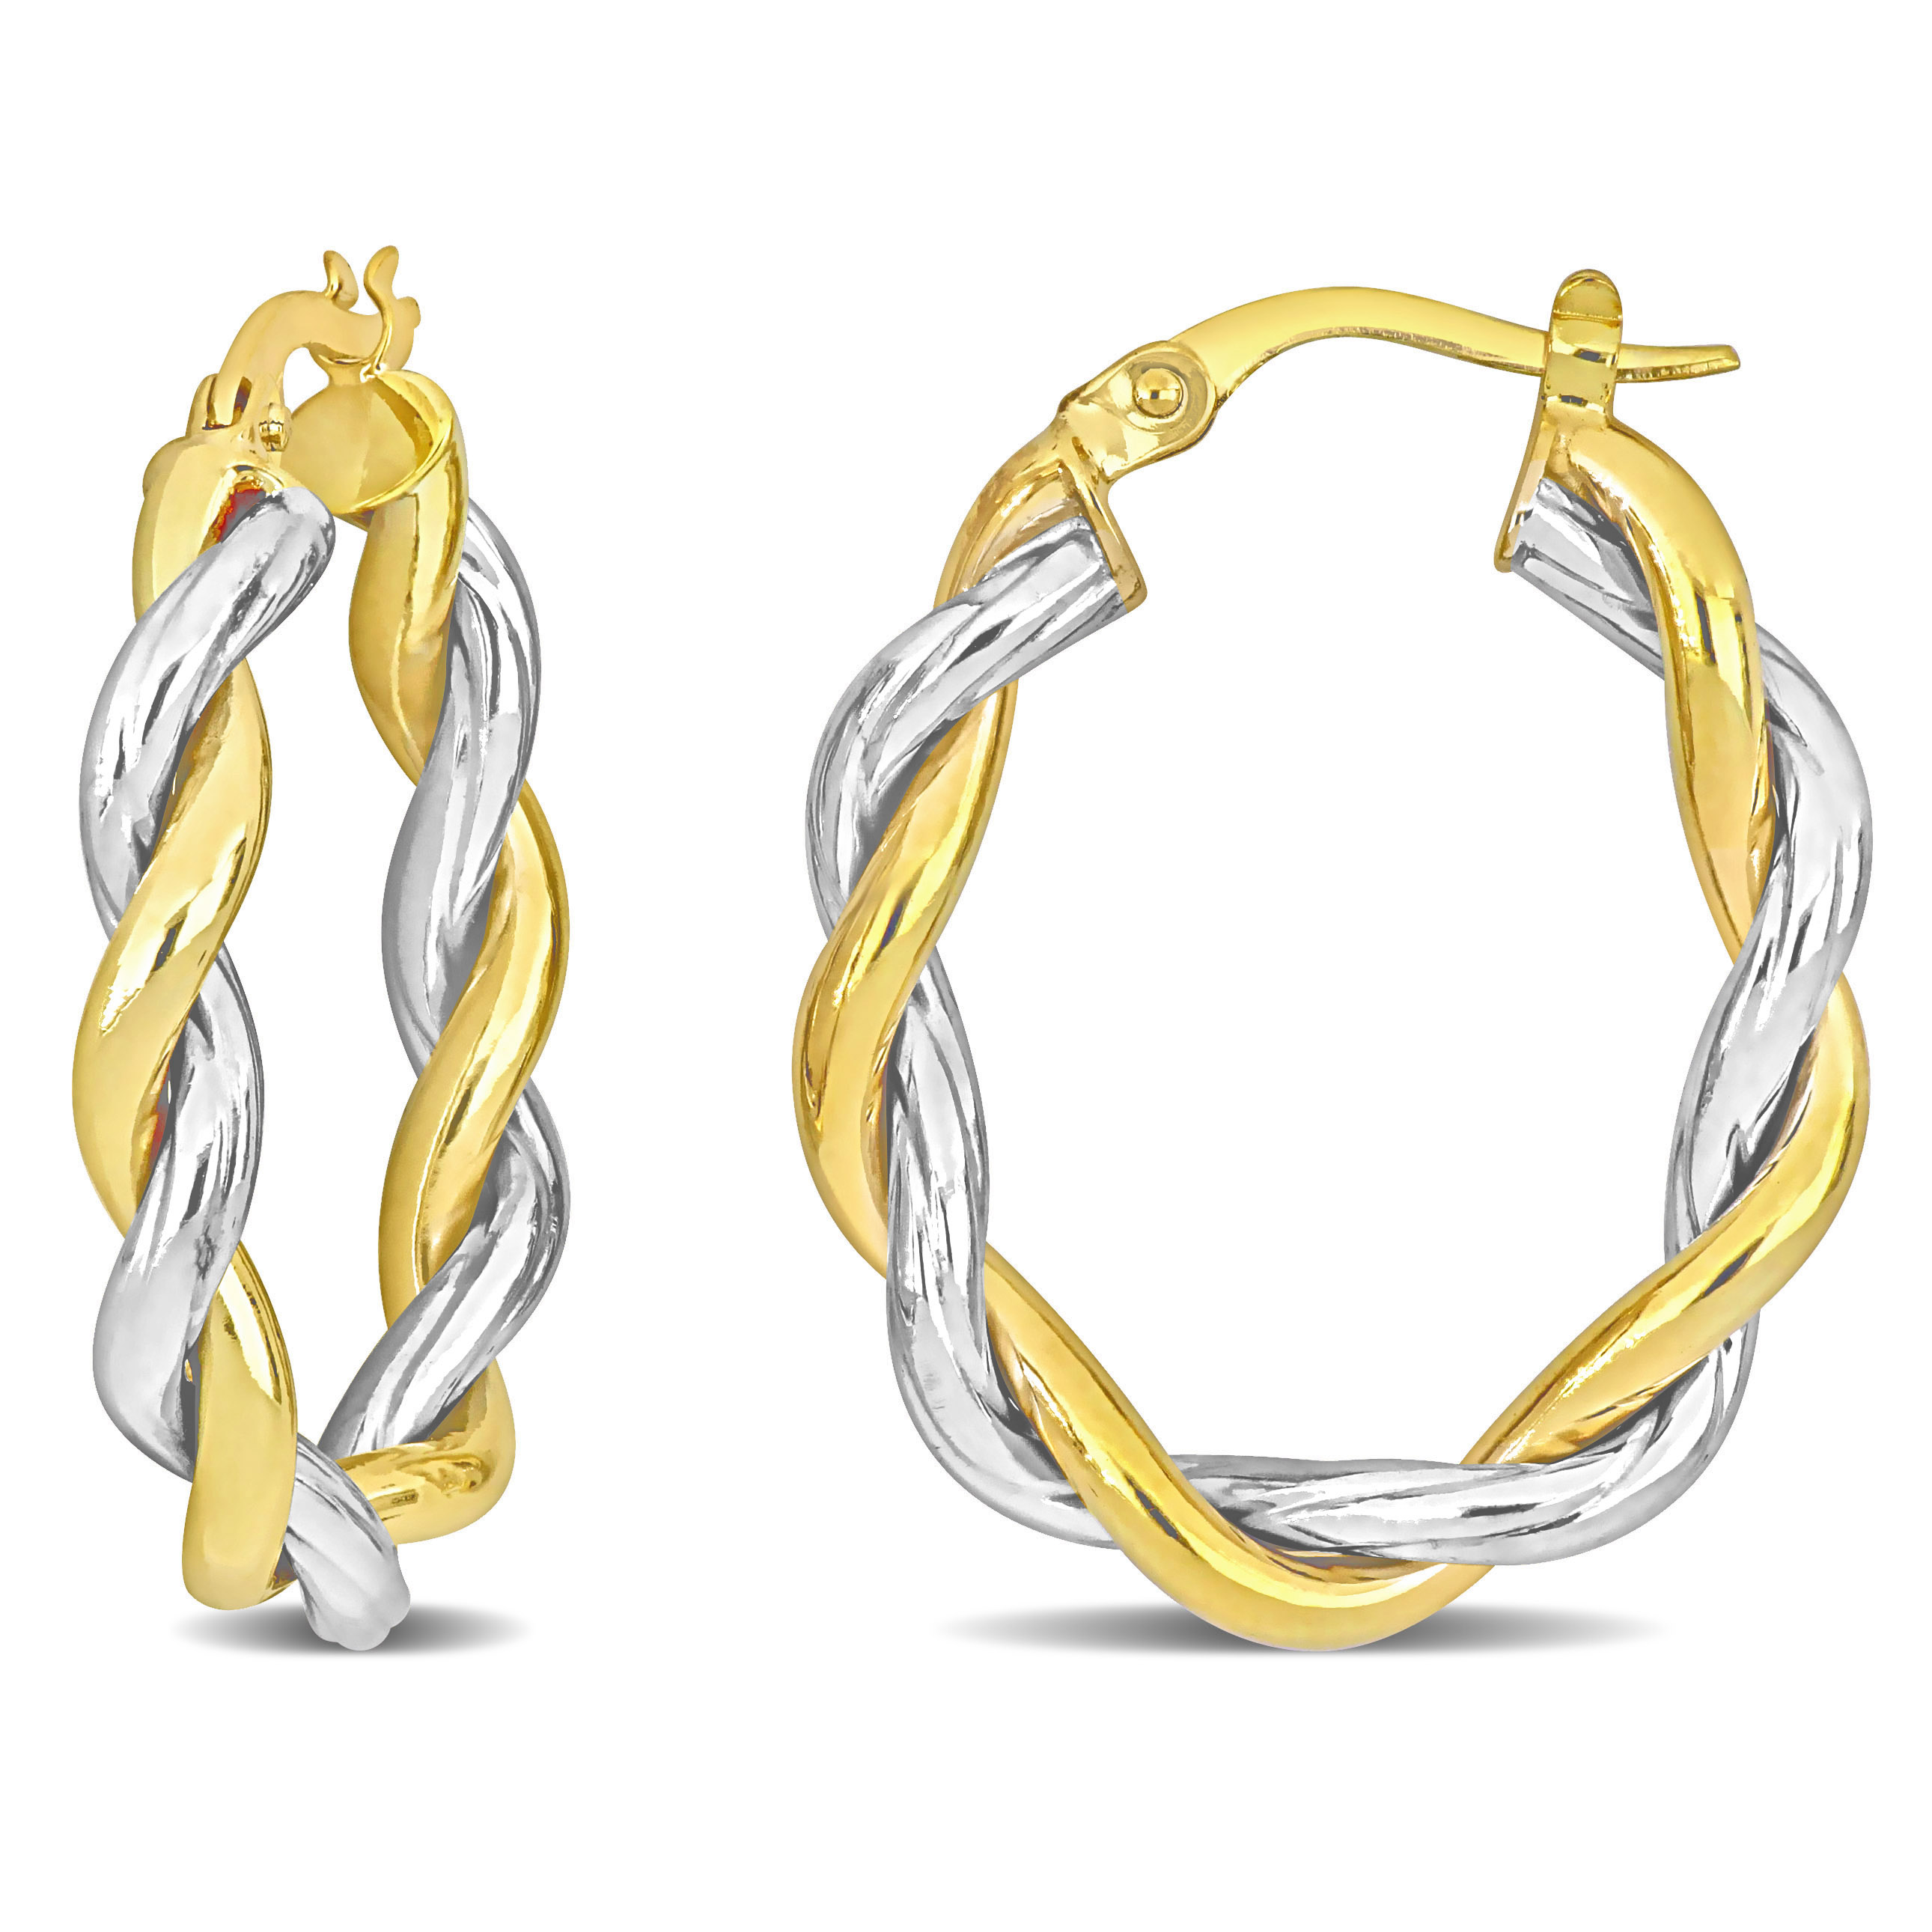 27 MM Twisted Oval Hoop Earrings in 2-Tone 10k Yellow and White Gold